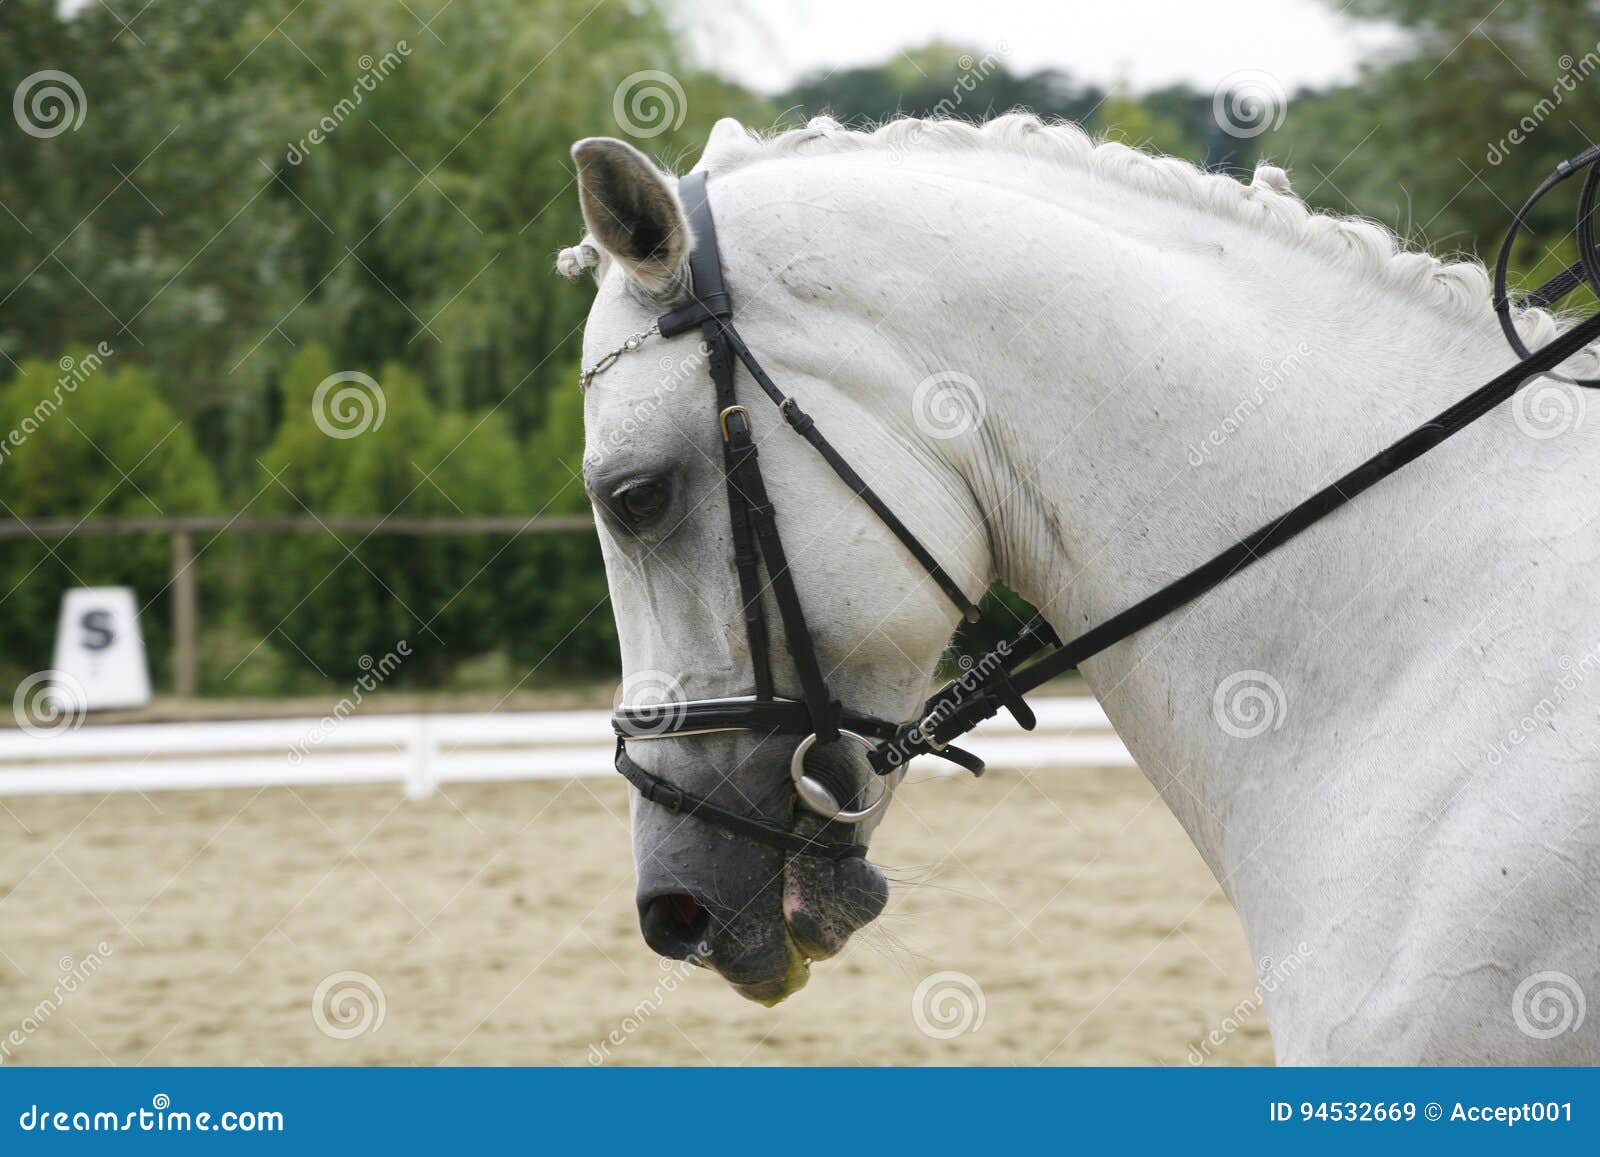 lipizzaner horse with braided mane on the racetrack